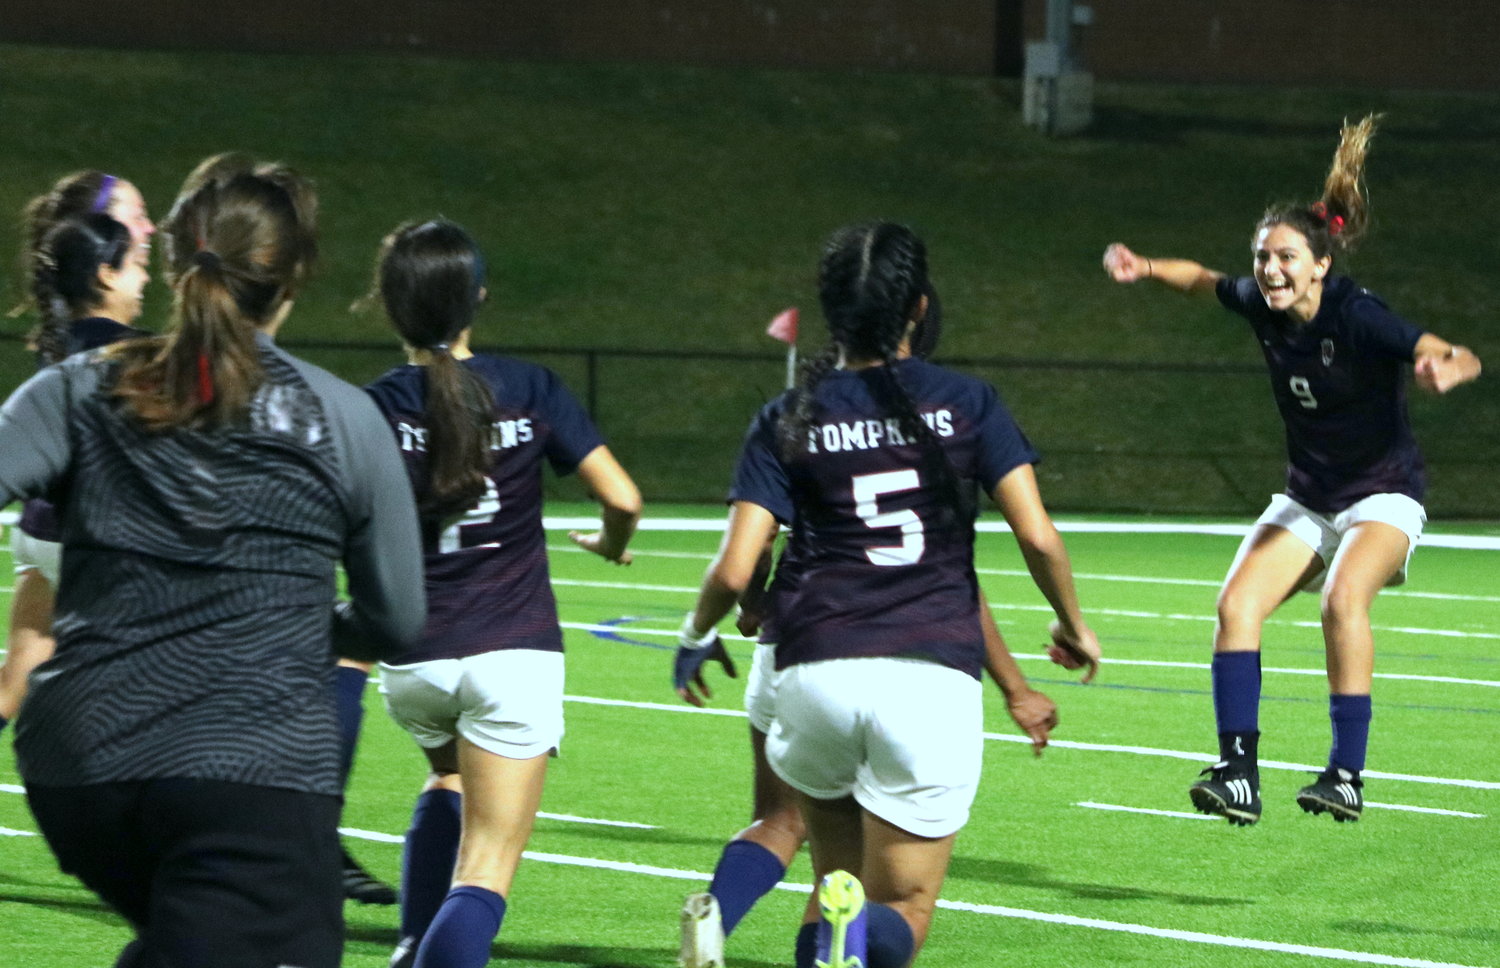 Valentina Gianinetto celebrates after making the winning penalty kick during Friday’s Class 6A bi-district round game between Tompkins and George Ranch at Rhodes Stadium.